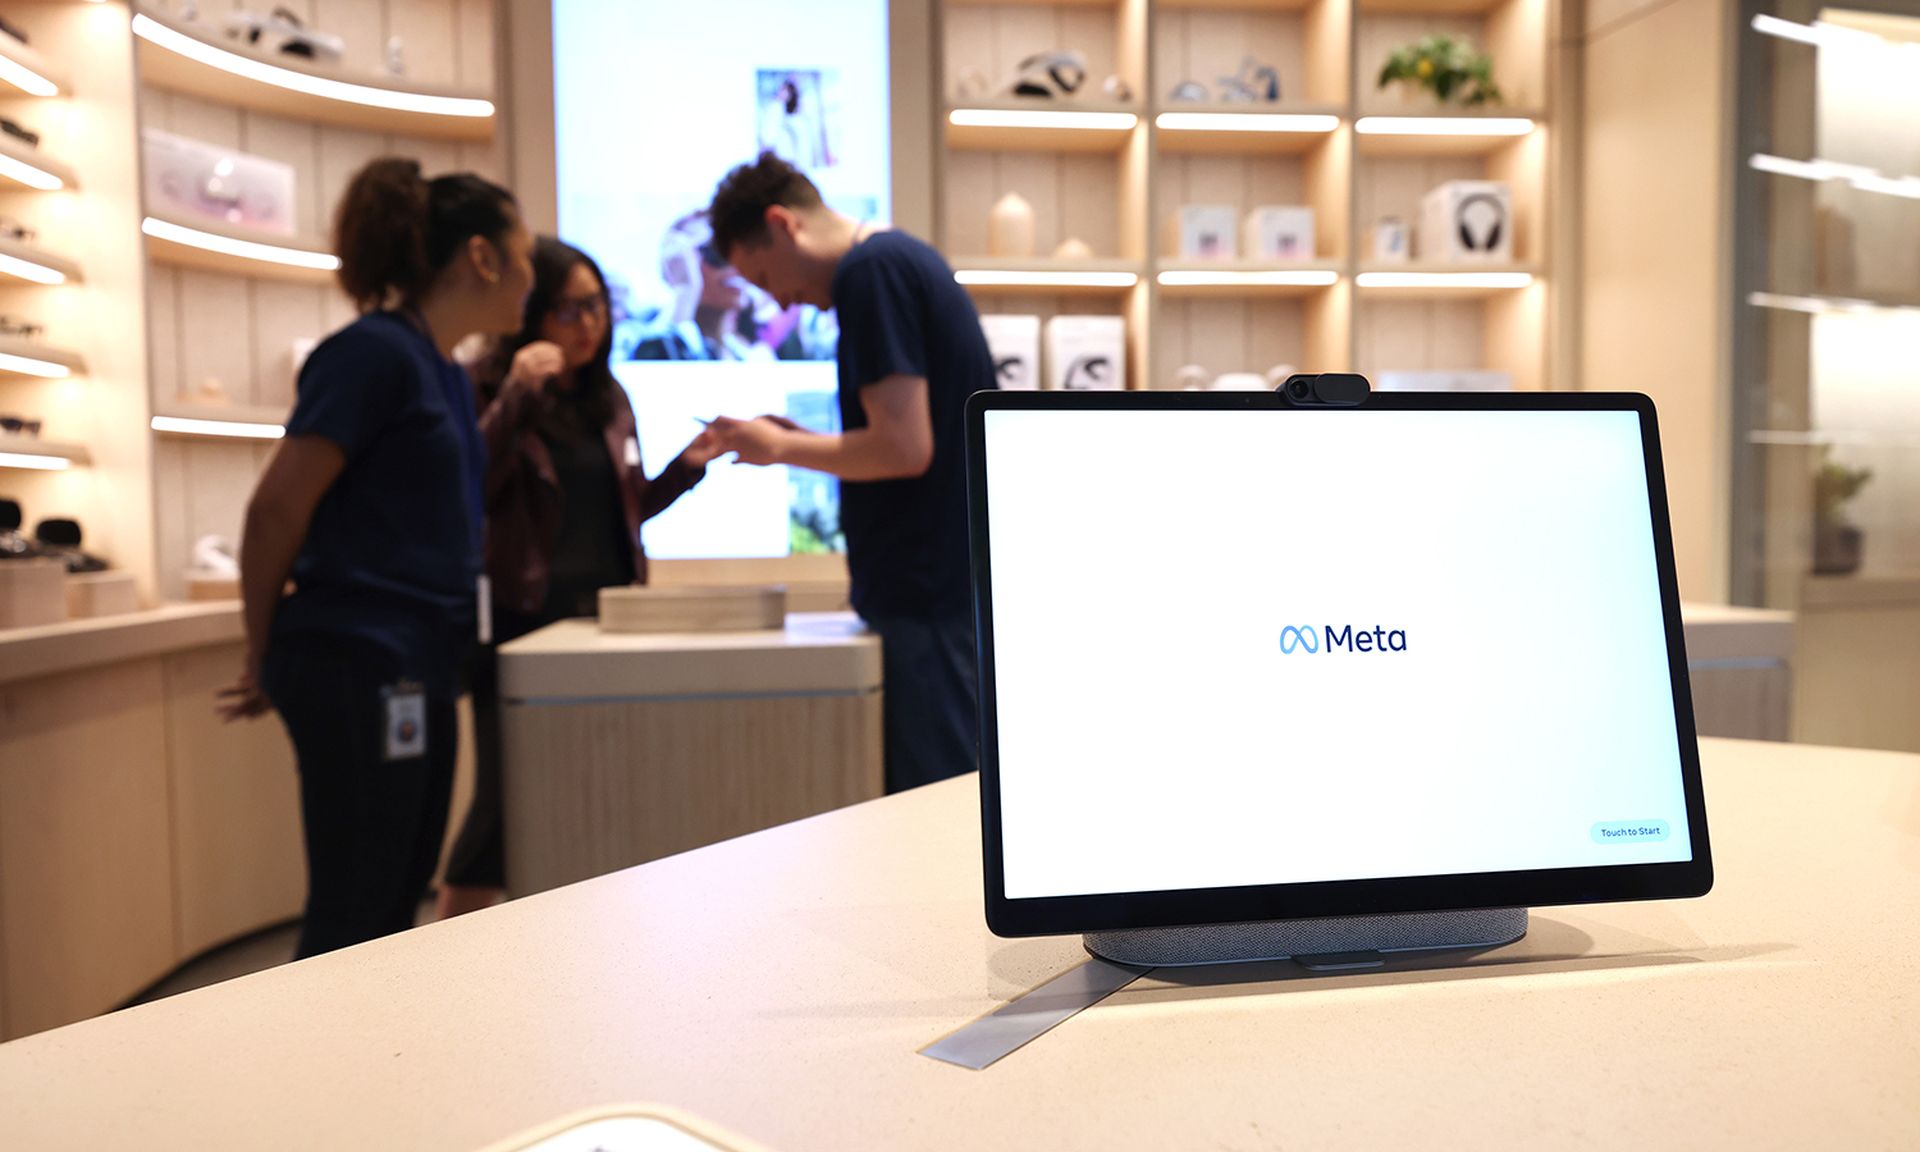 The Meta logo is displayed on a screen during a media preview of the new Meta Store